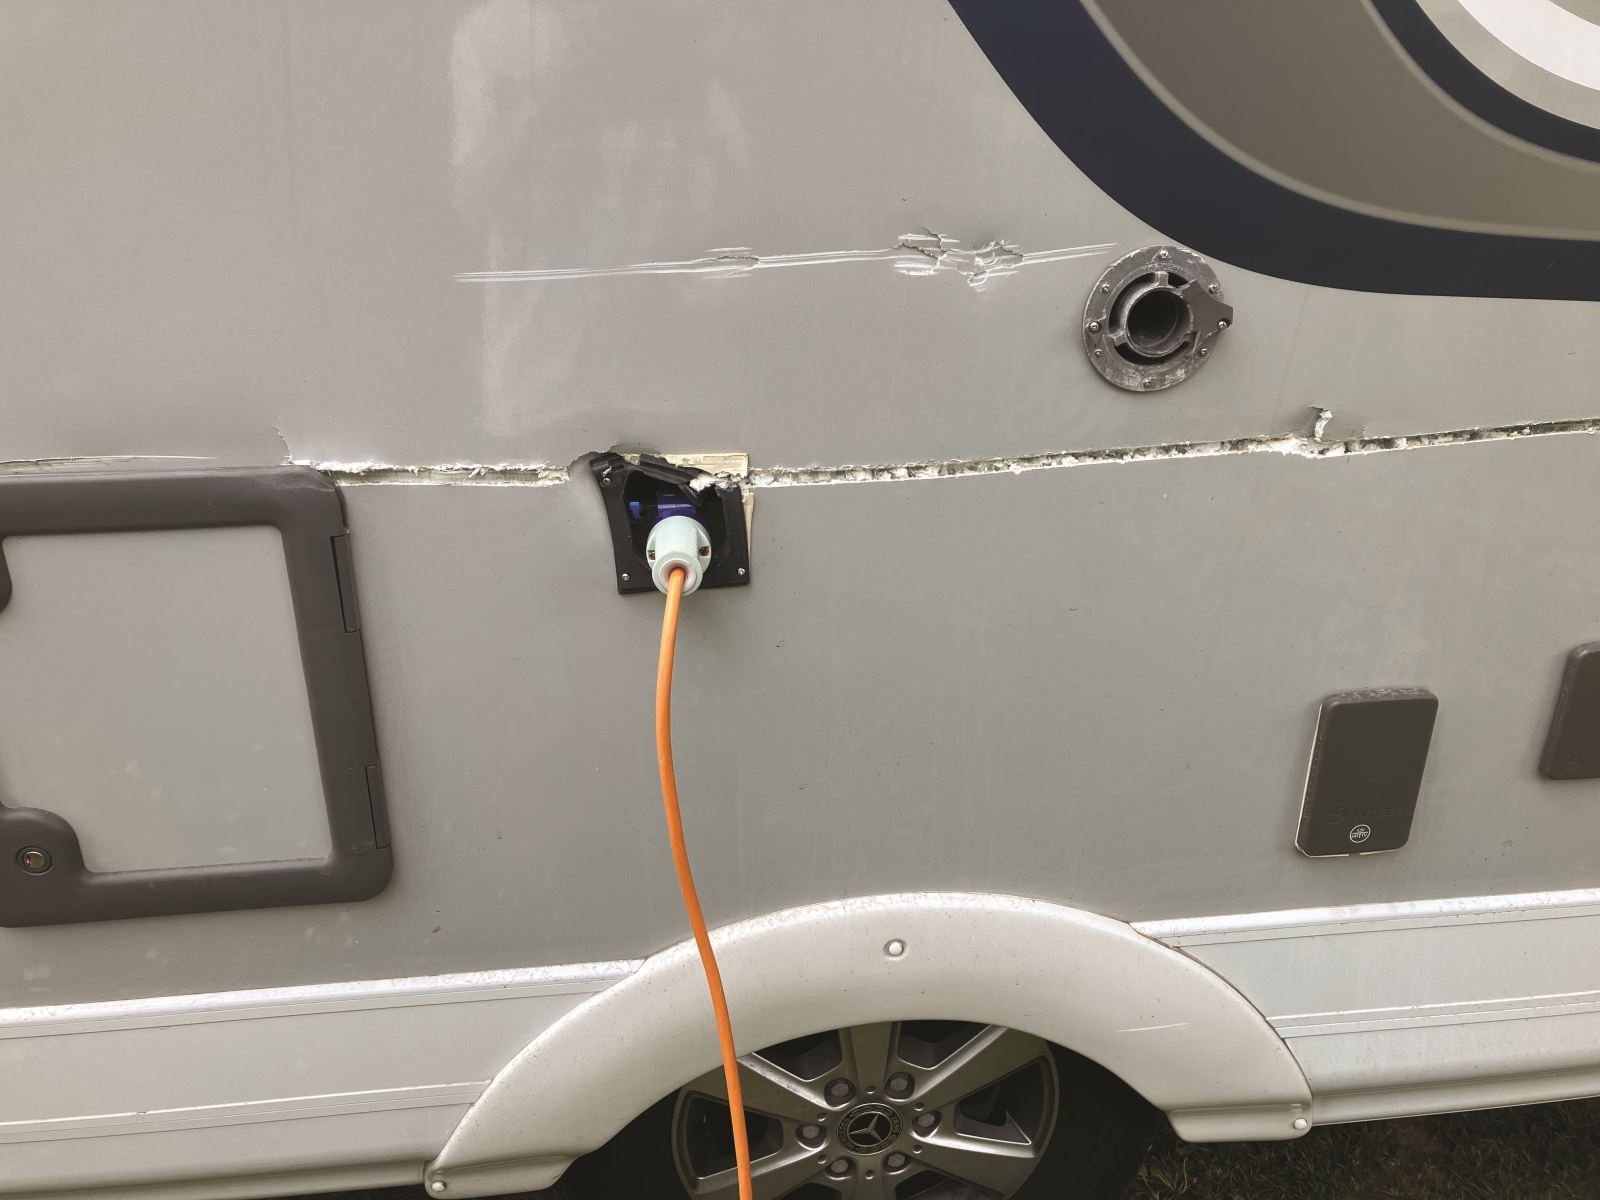 Make sure your motorhome insurance policy covers accidental damage